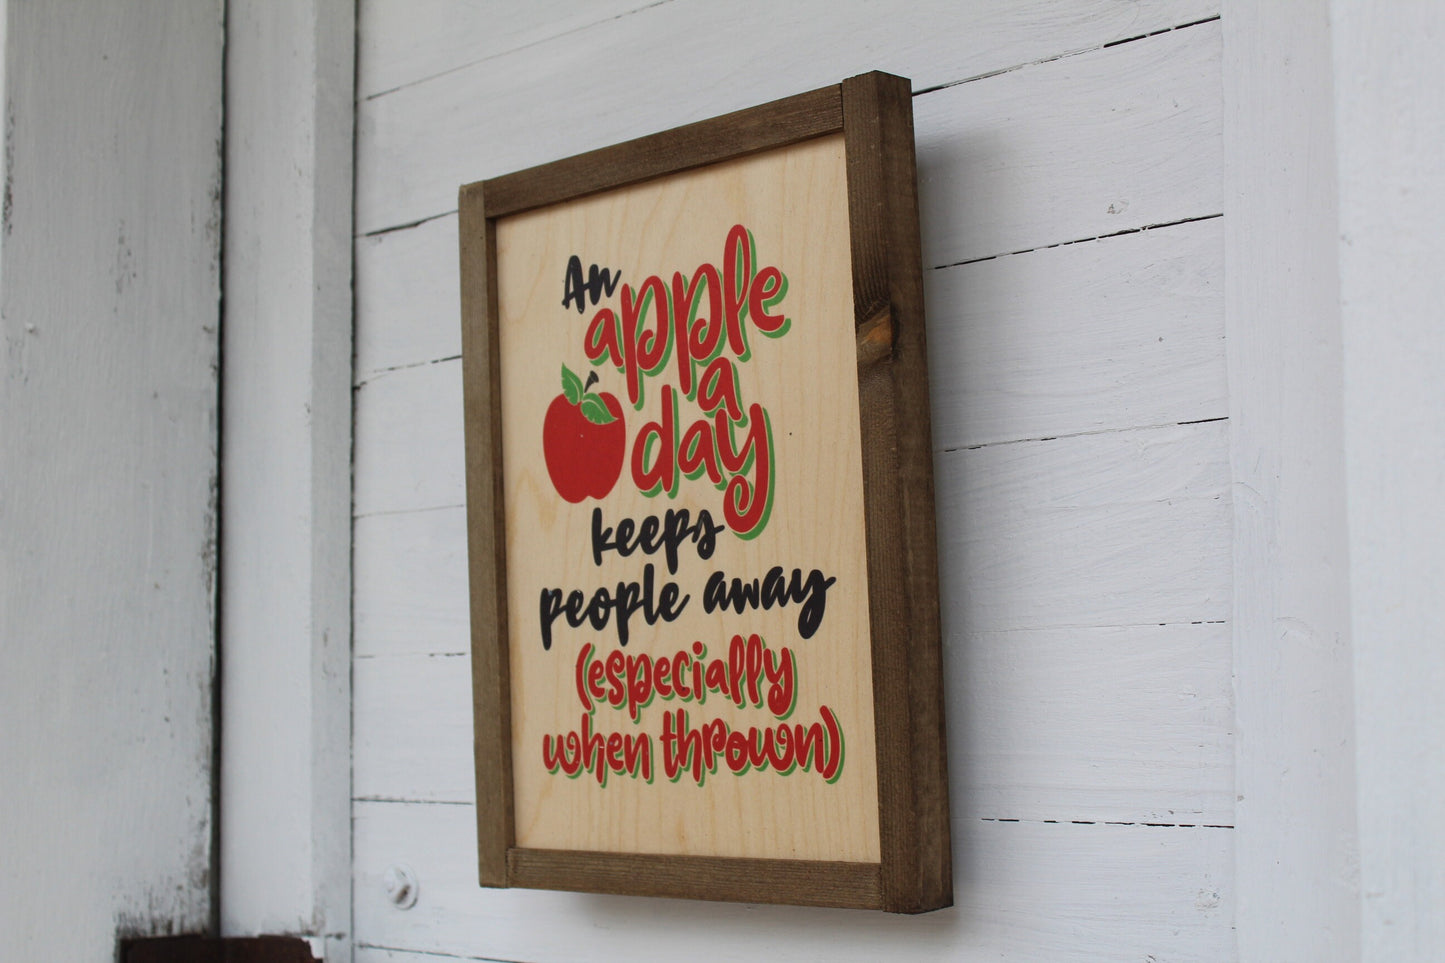 An Apple A Day Keeps People Away Especially When Thrown Funny Teacher Doctor Kitchen Sign Rustic Wood Print Decor Farmhouse Primitive Wall